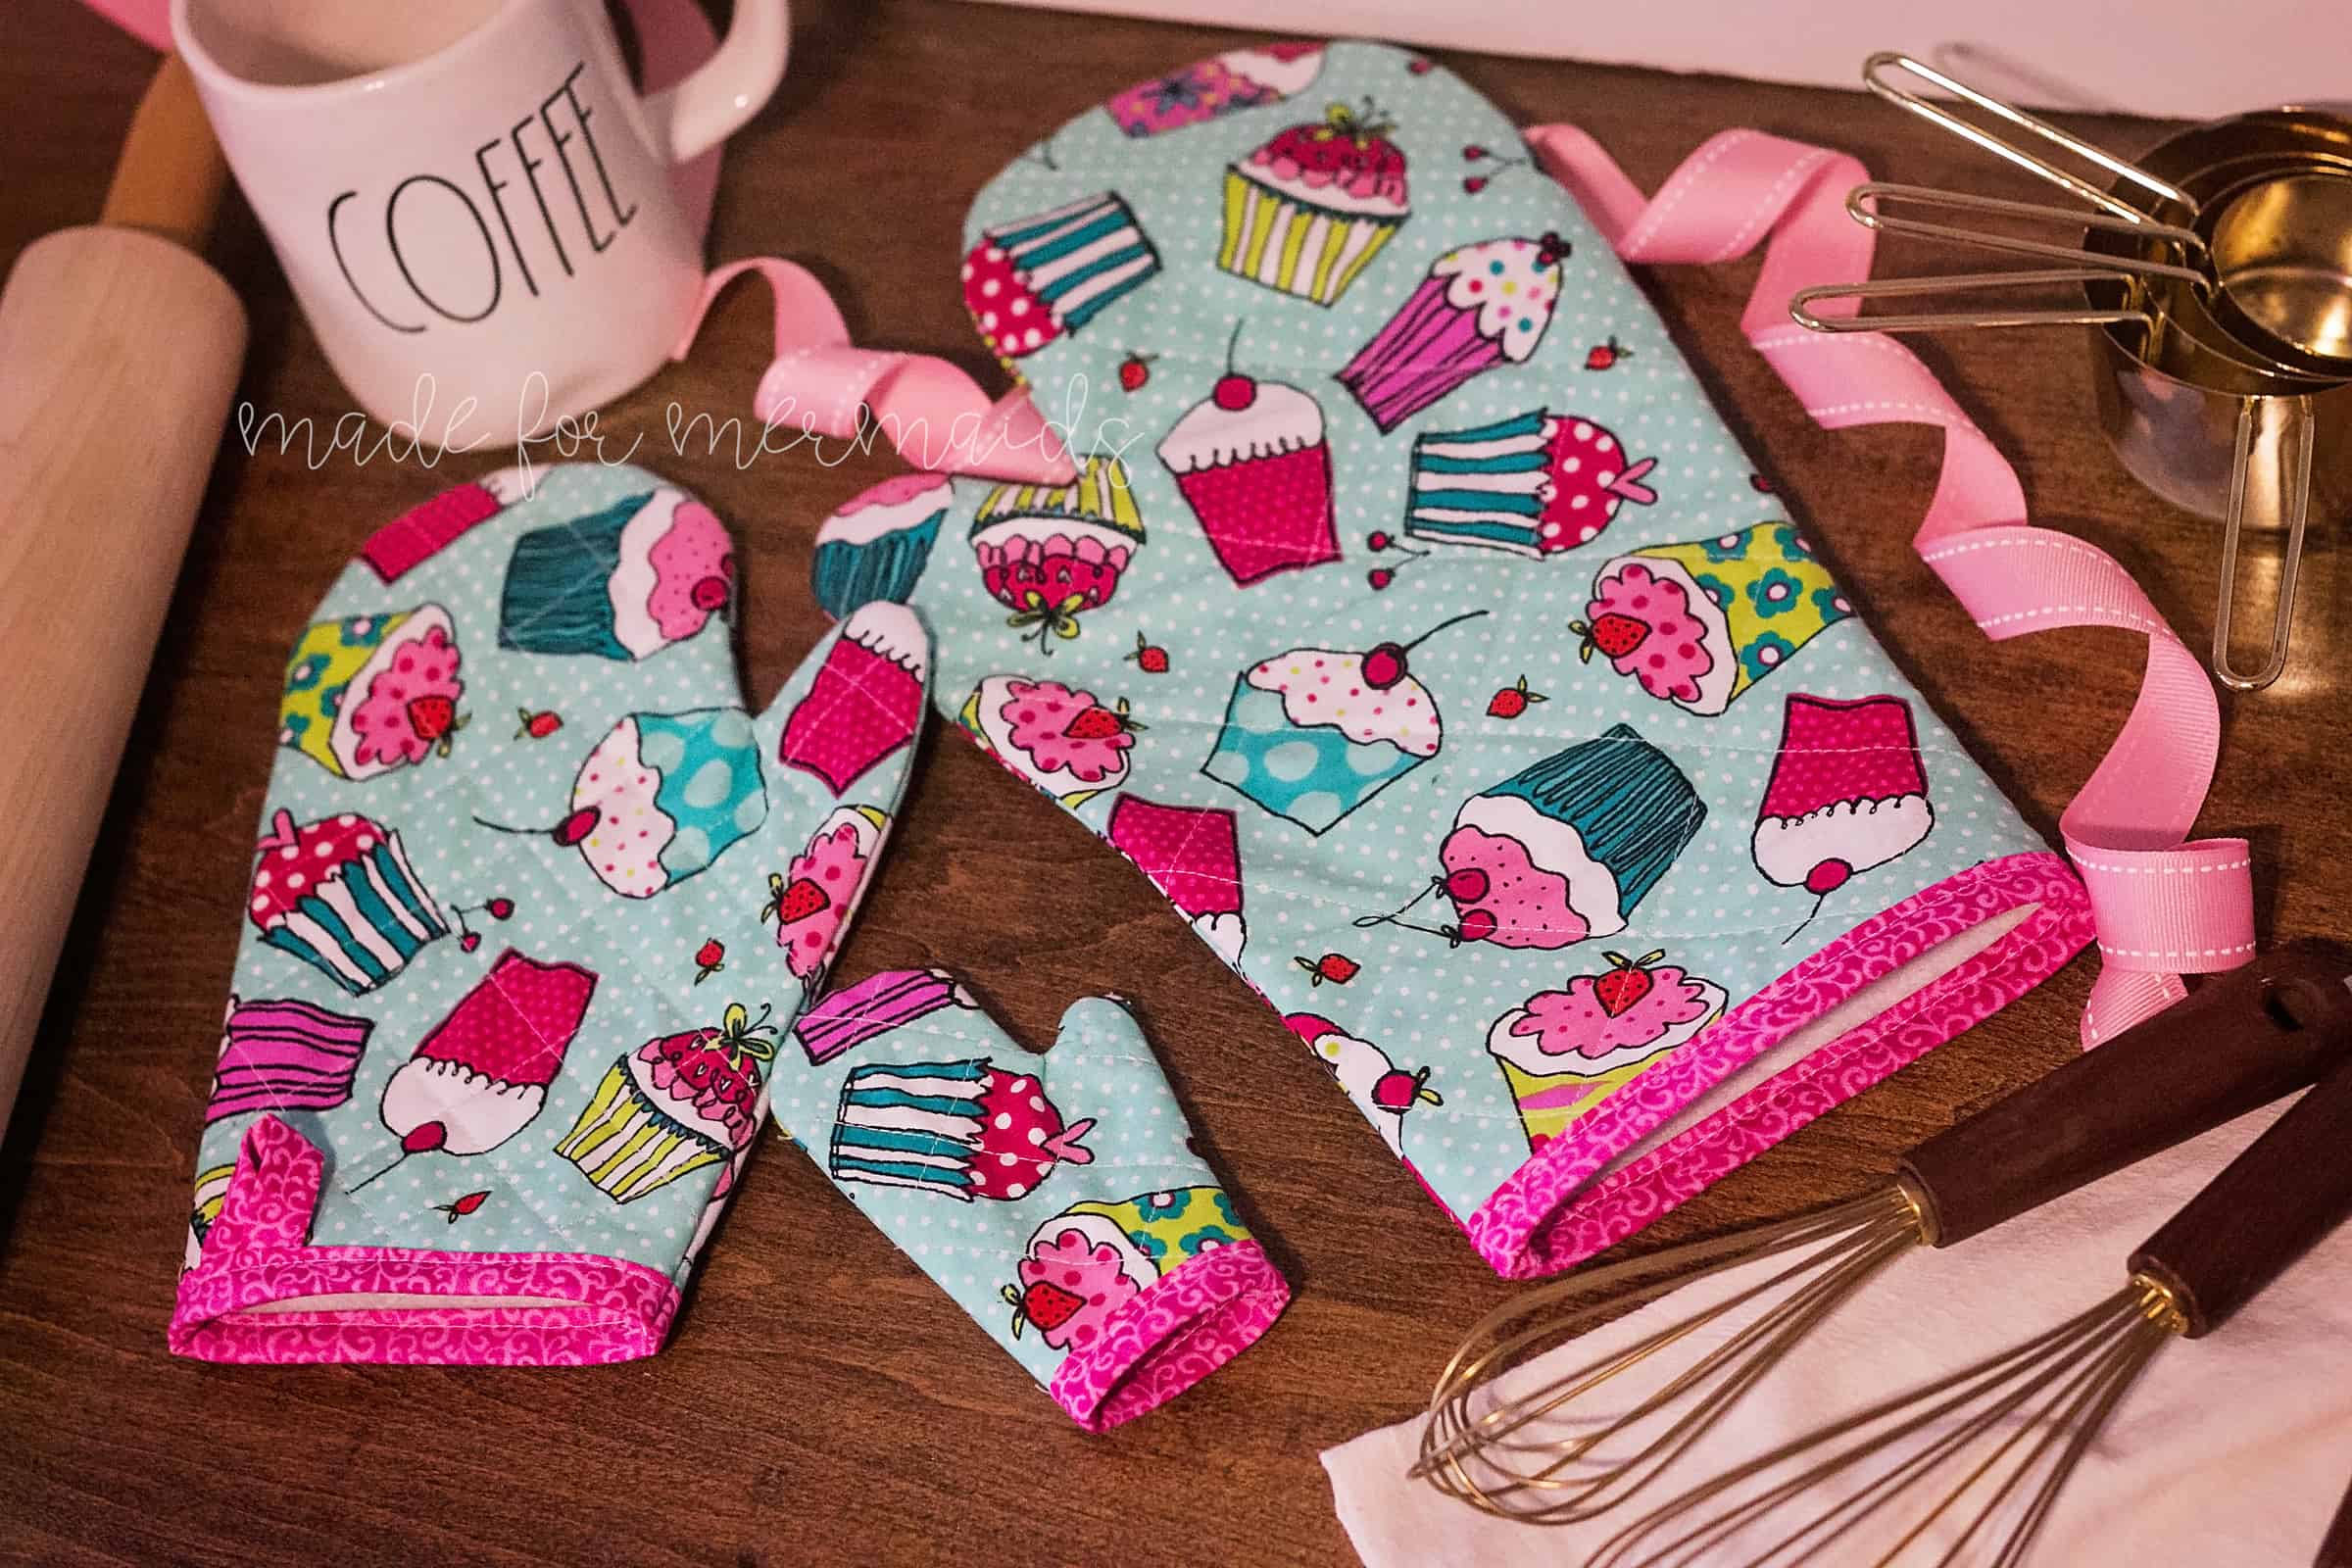 Reversible Double Oven Mitt - PDF Pattern ONLY Download